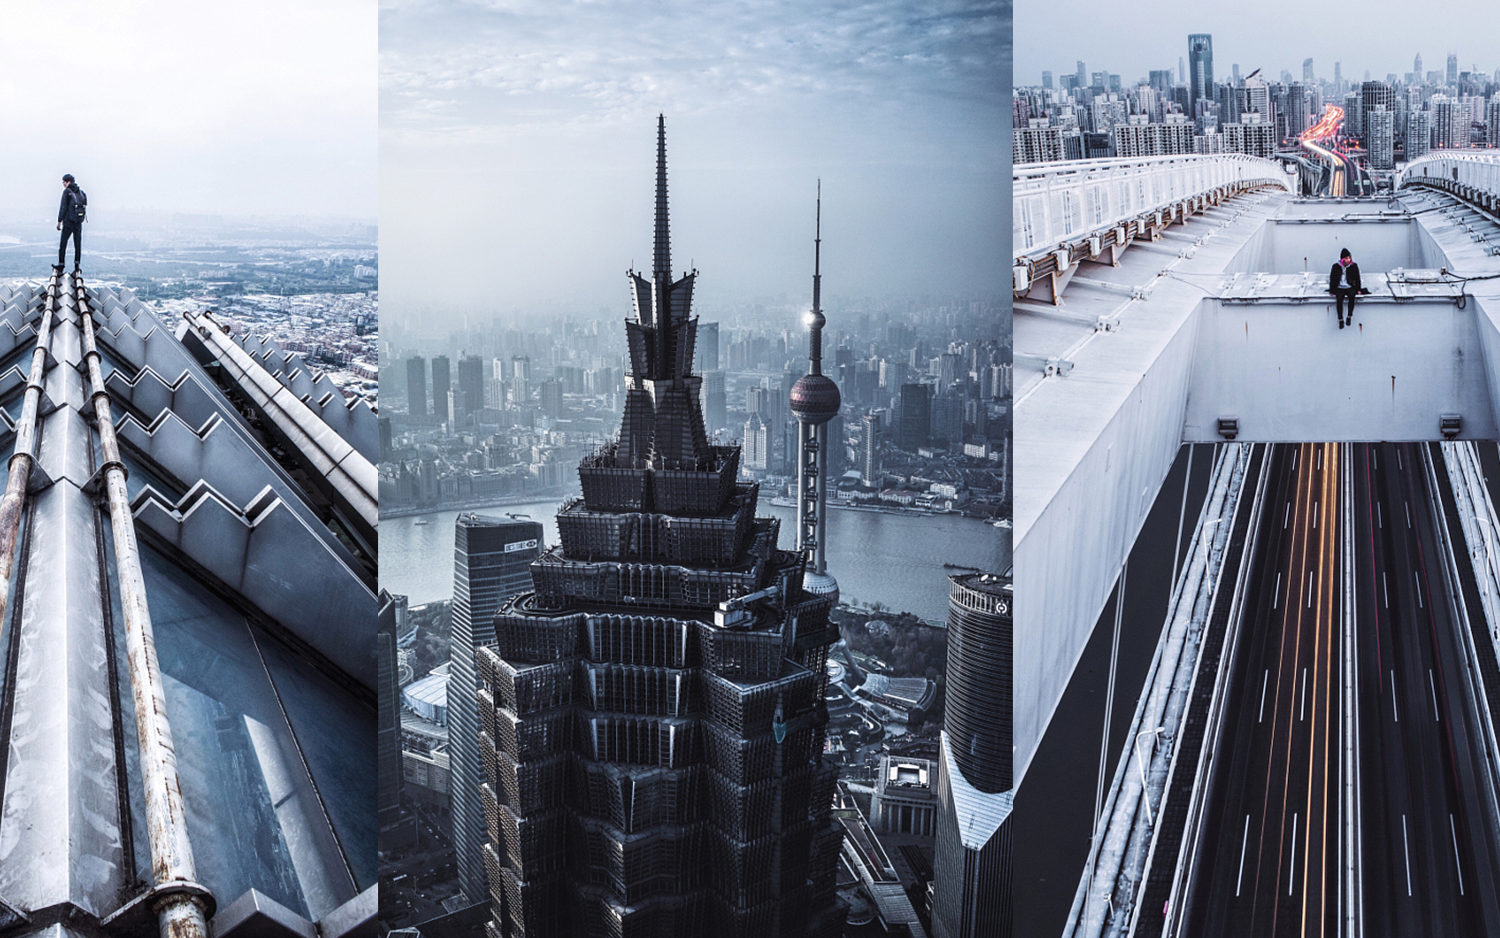 6 Top Tips For Photographing Rooftops and Cities